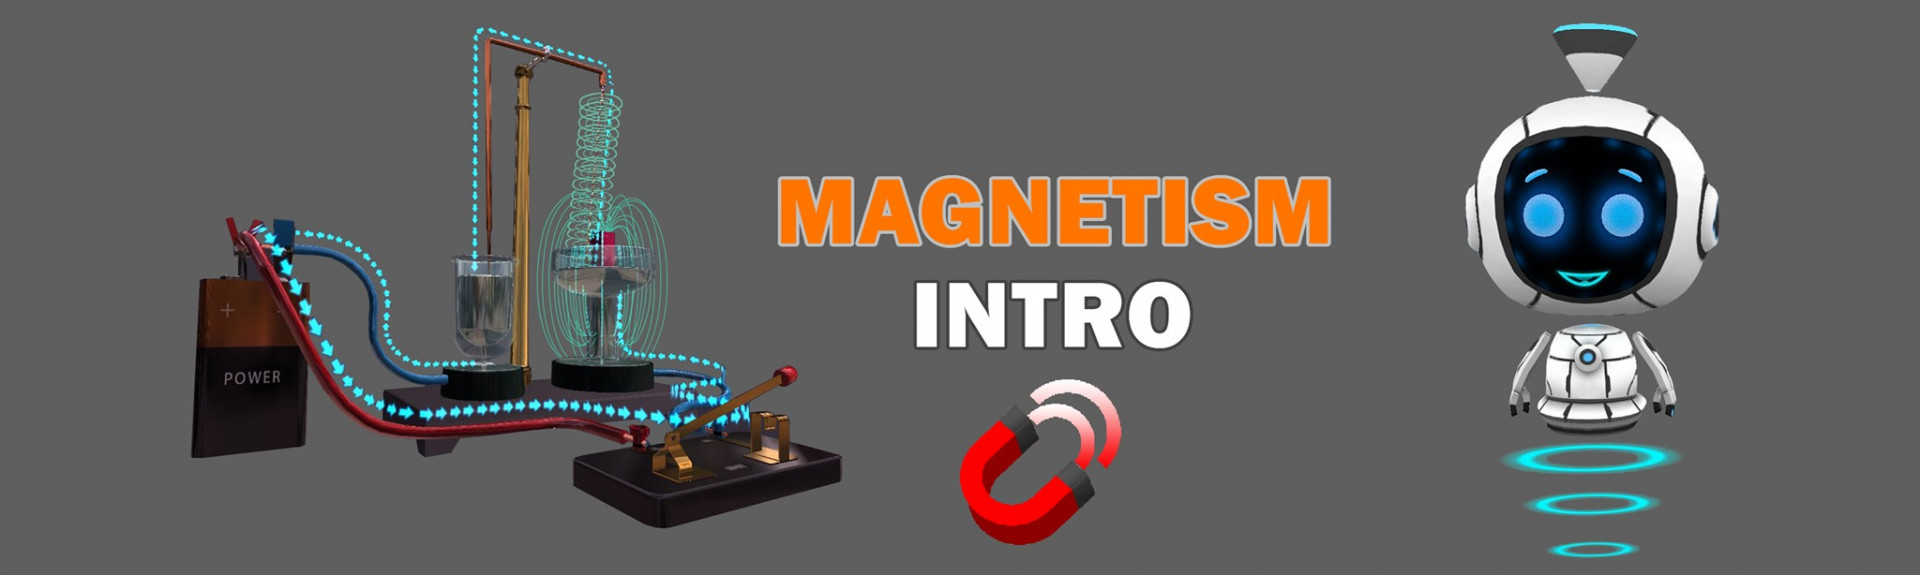 Magnetism Intro